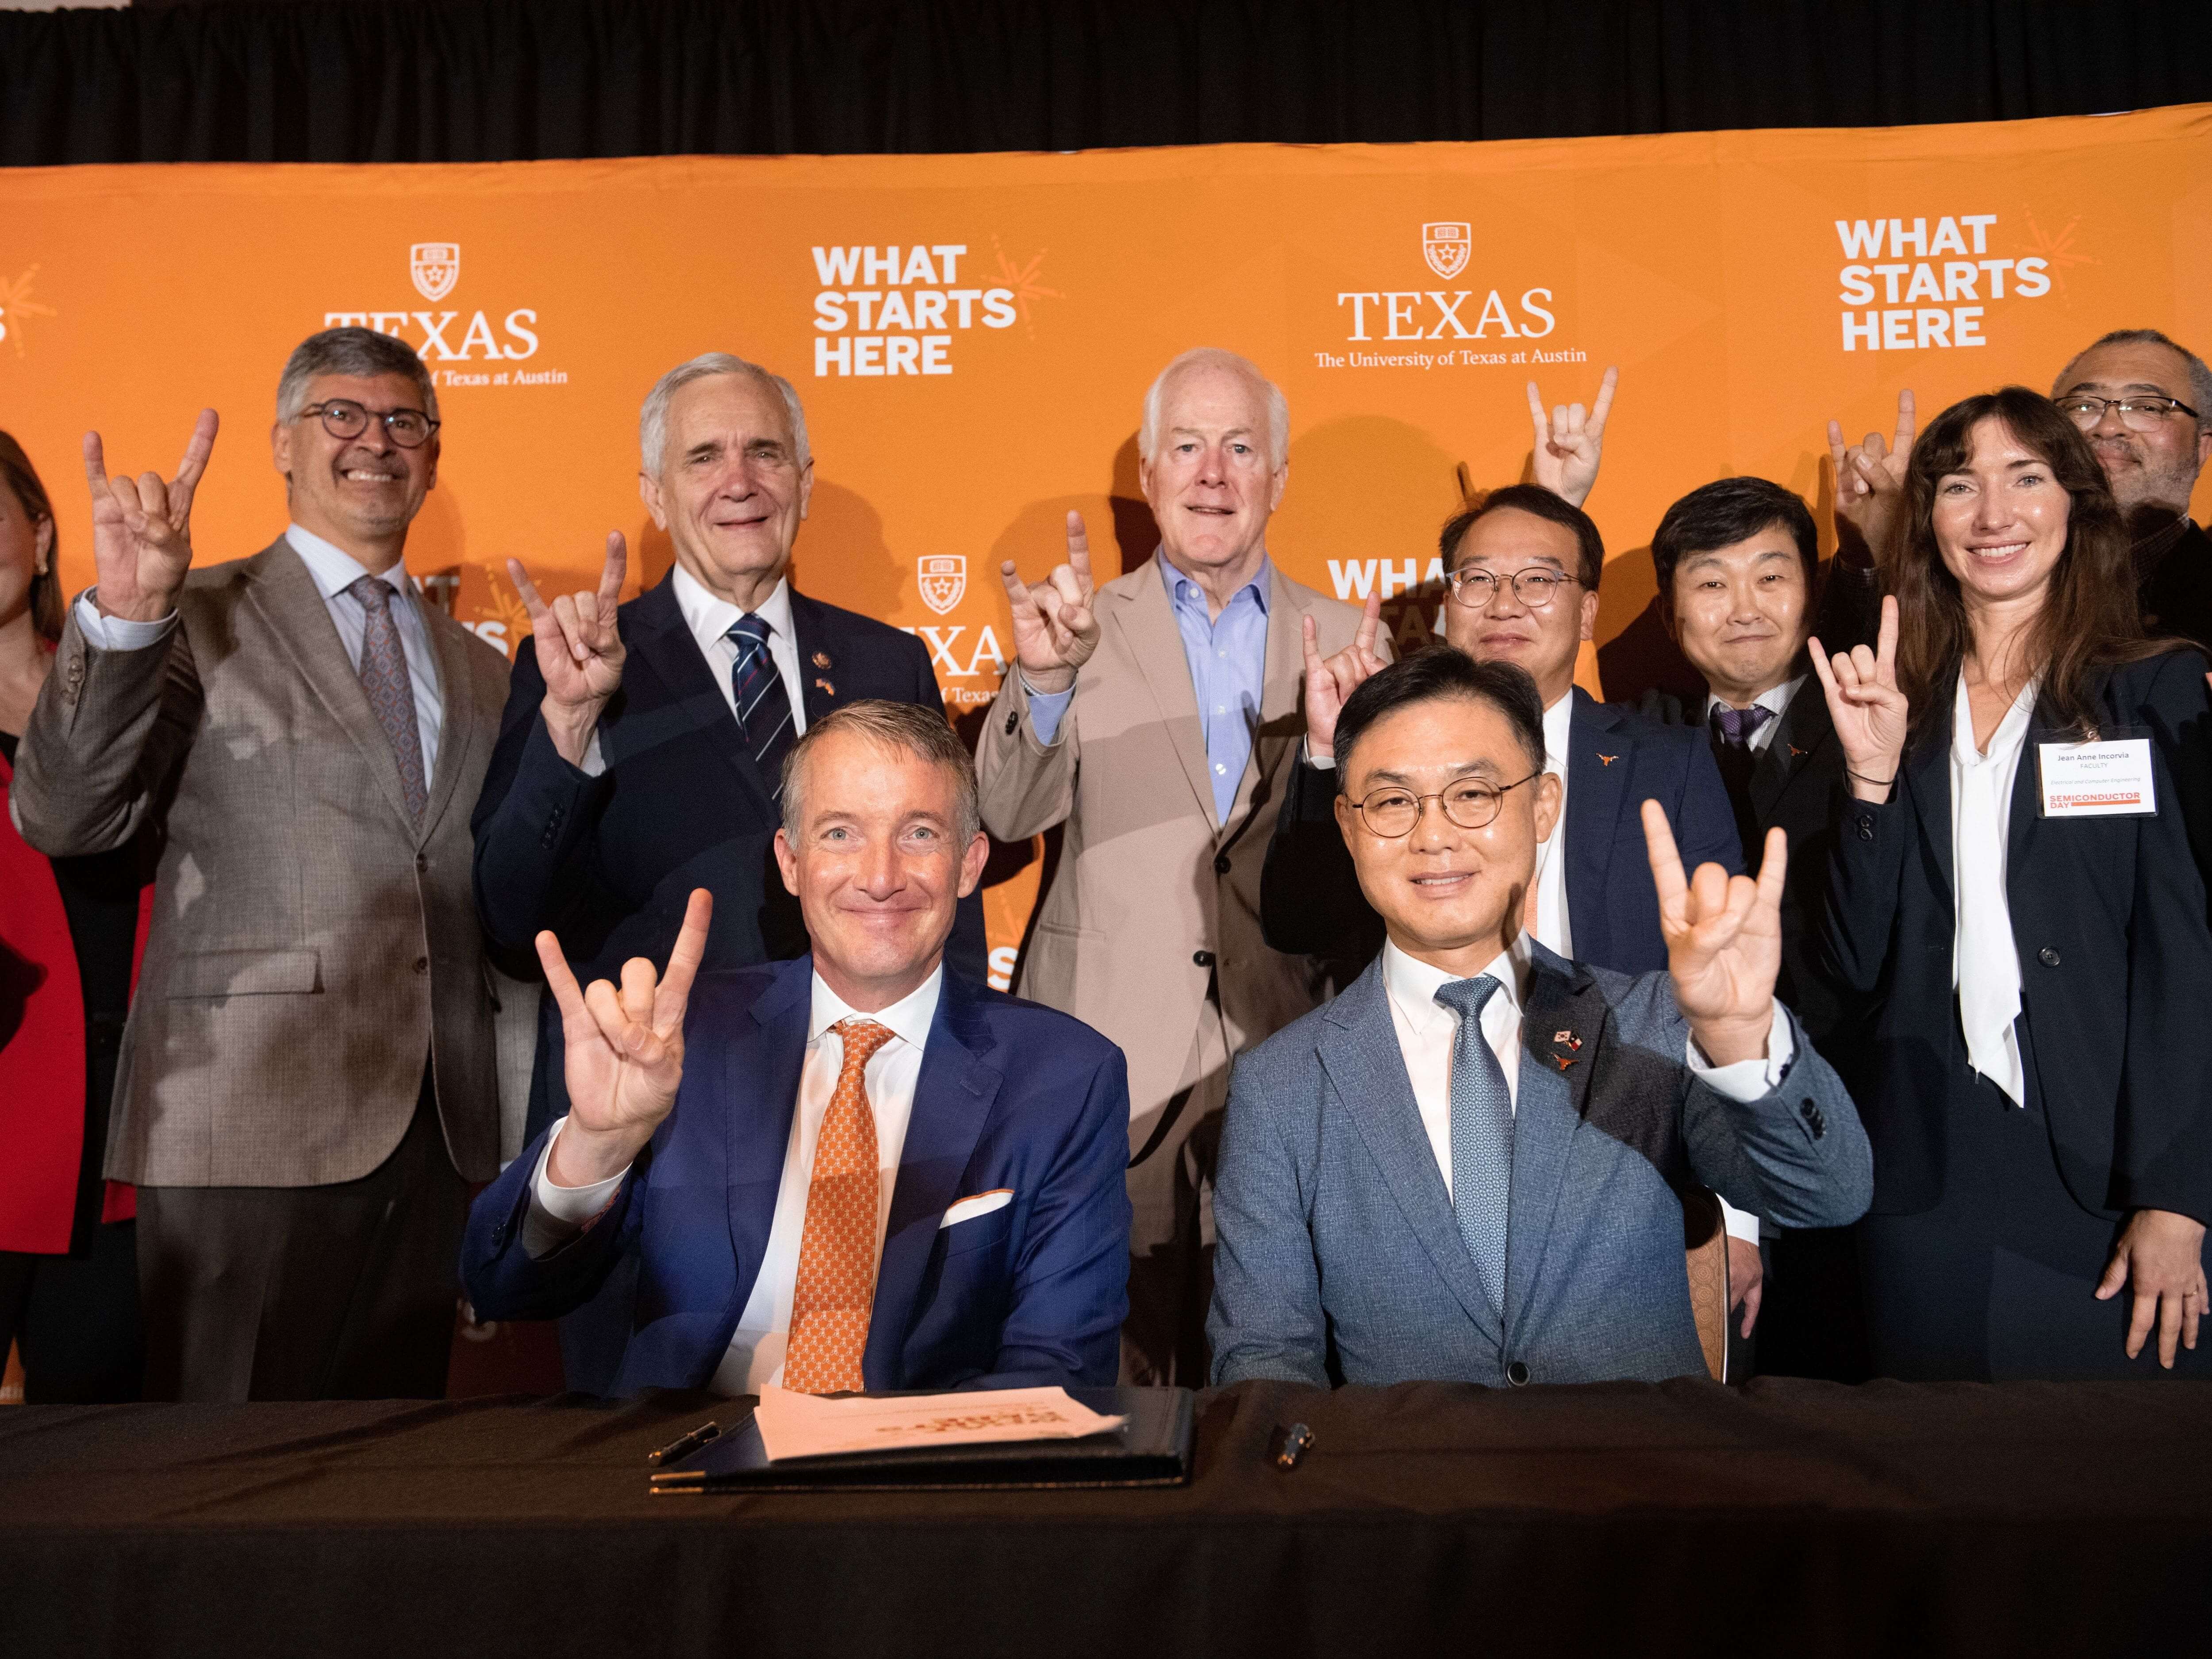 UT Austin leadership and Semiconductor Day speakers doing hook 'em horns hand signs